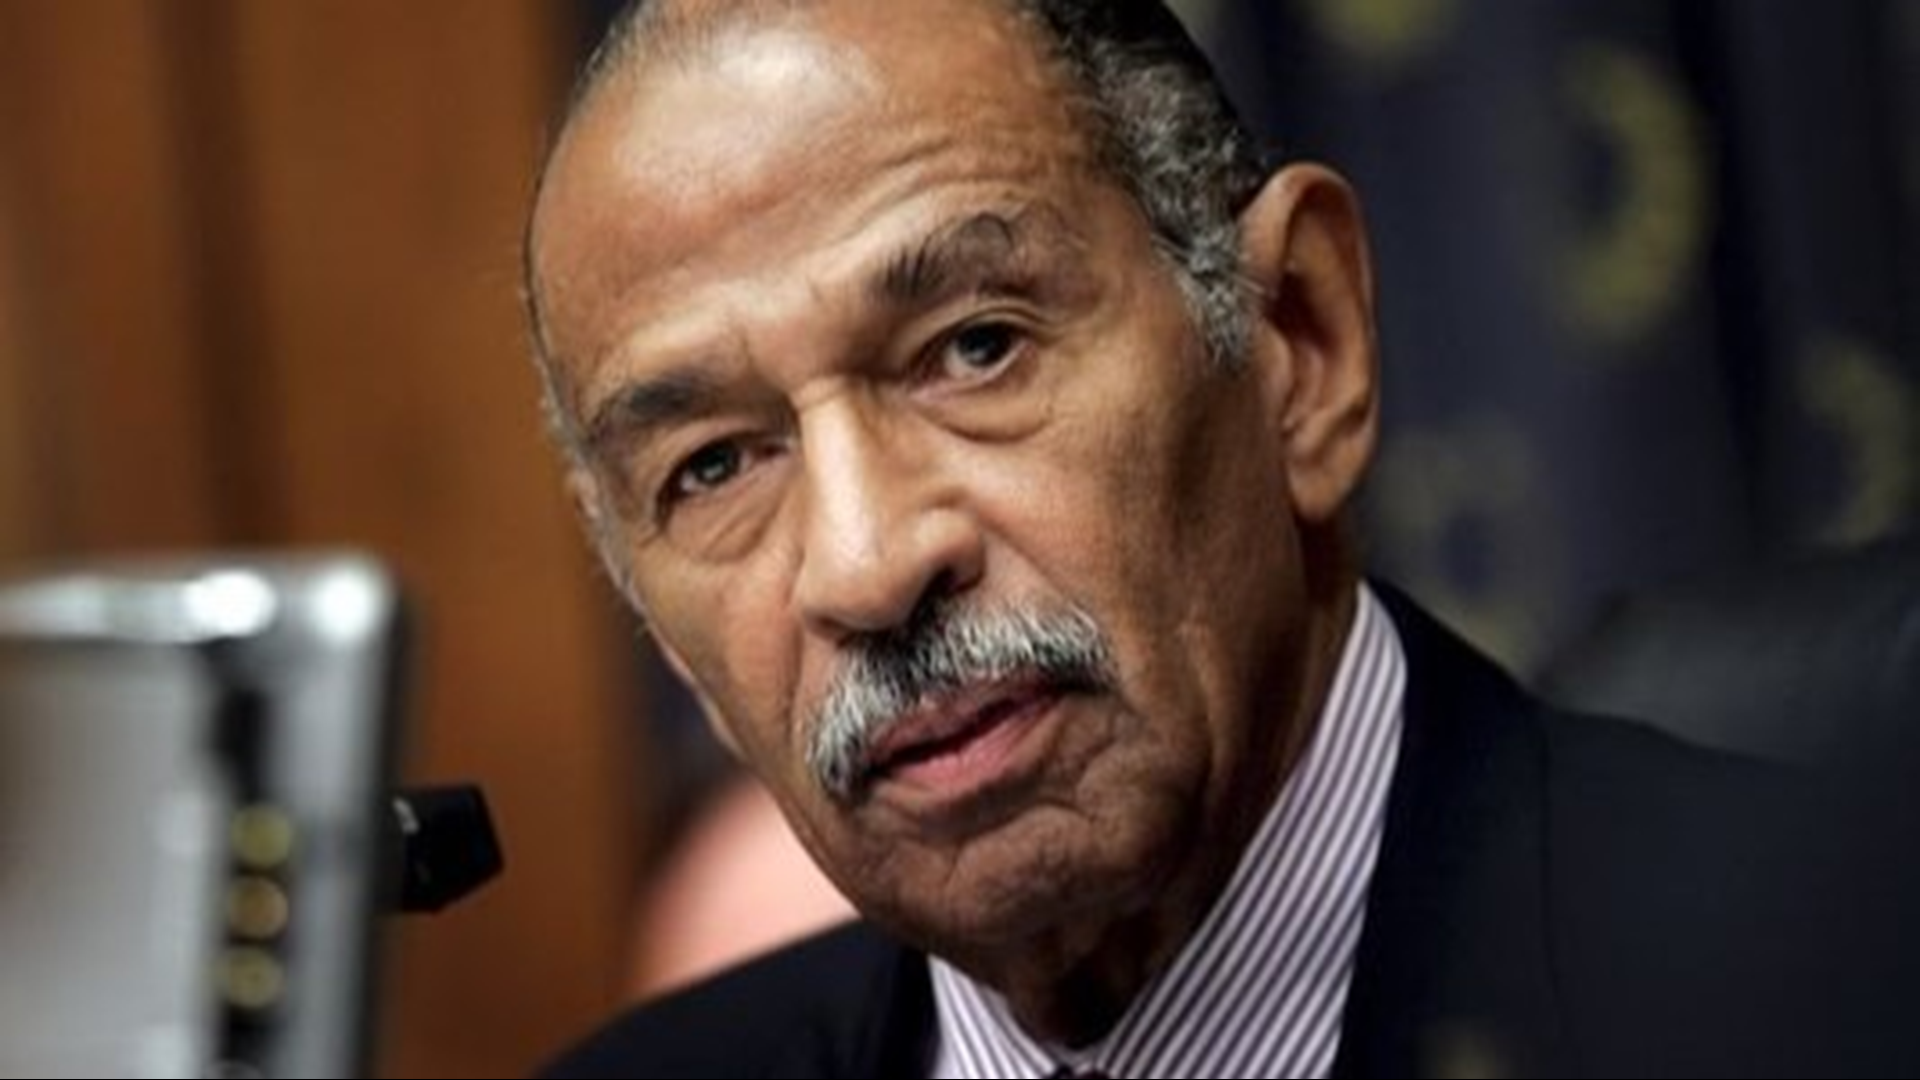 Funeral services are scheduled in Detroit for longtime Democratic U.S. Rep. John Conyers.